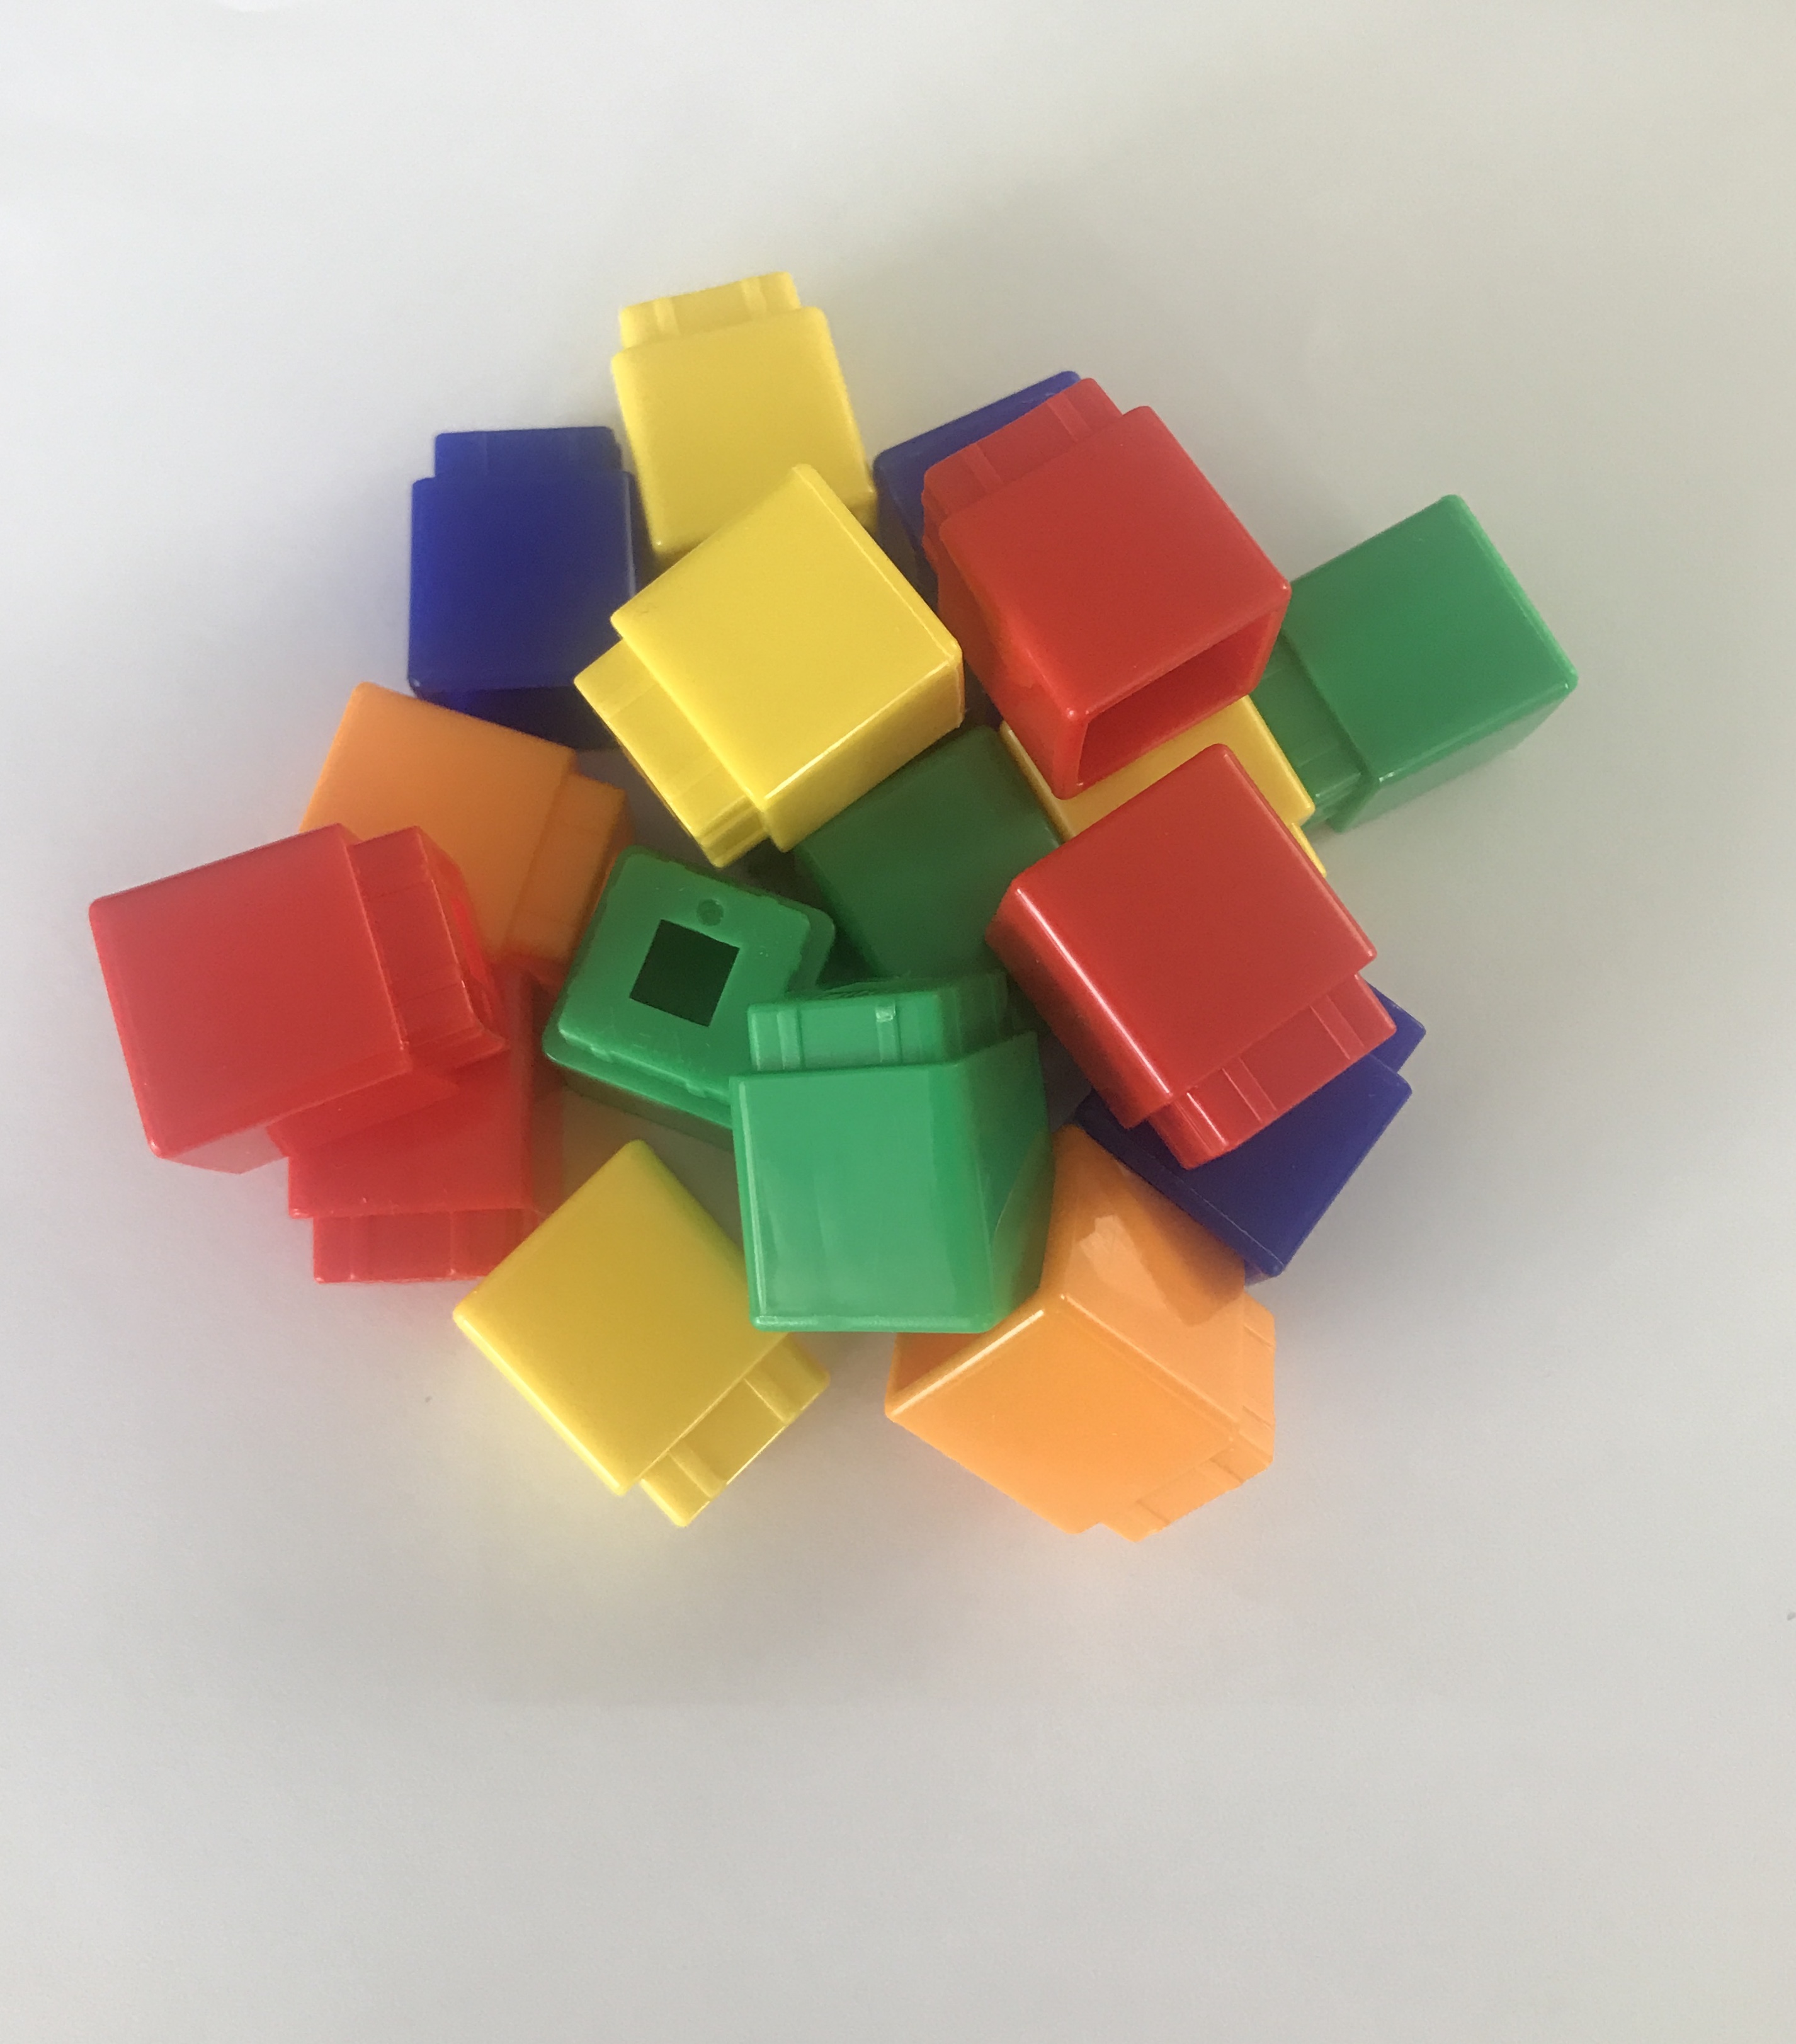 Pile of connecting cubes.